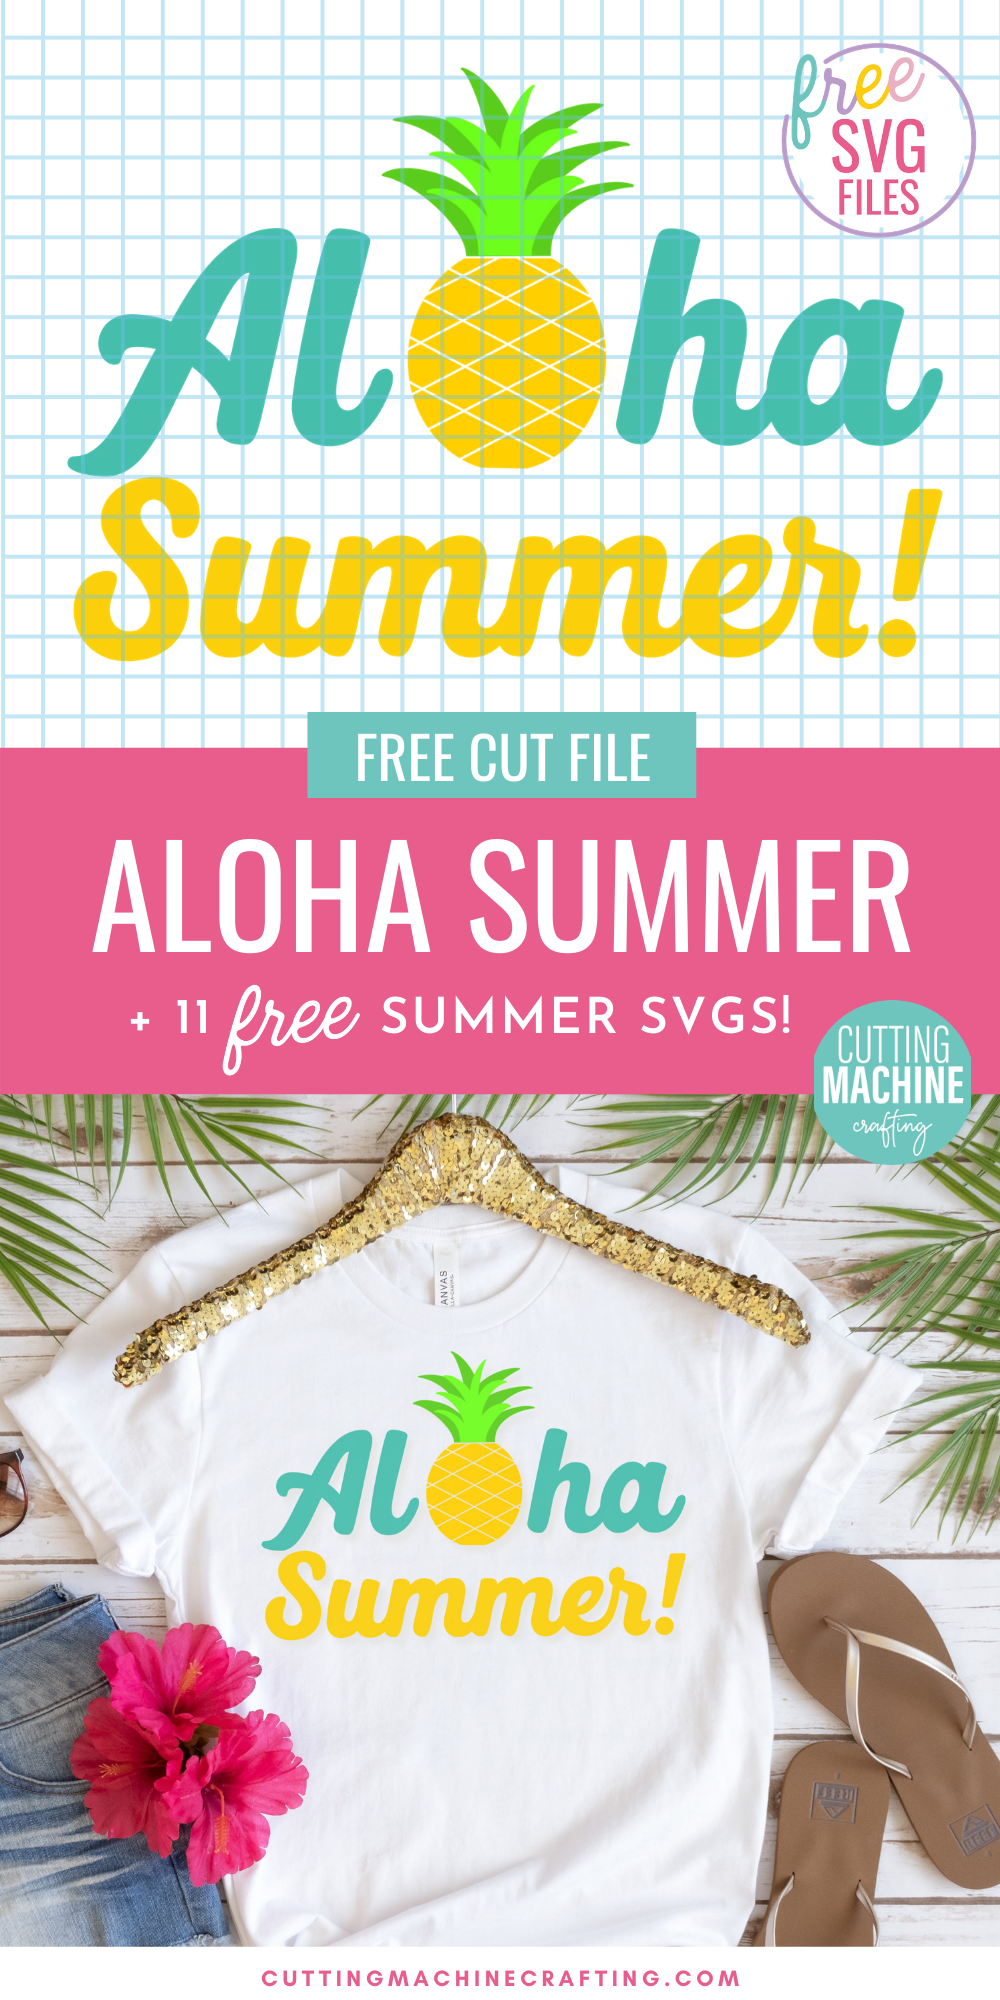 Get in the Aloha spirit with this summery Aloha SVG file along with 11 summer cut files from some of your favorite craft bloggers! The Aloha Summer Cut File includes a pretty geometric pineapple! Make shirts, tank tops, onesies, beach bags and more using your Cricut Maker, Cricut Explore Air 2, Cricut Joy or other electronic cutting machine.